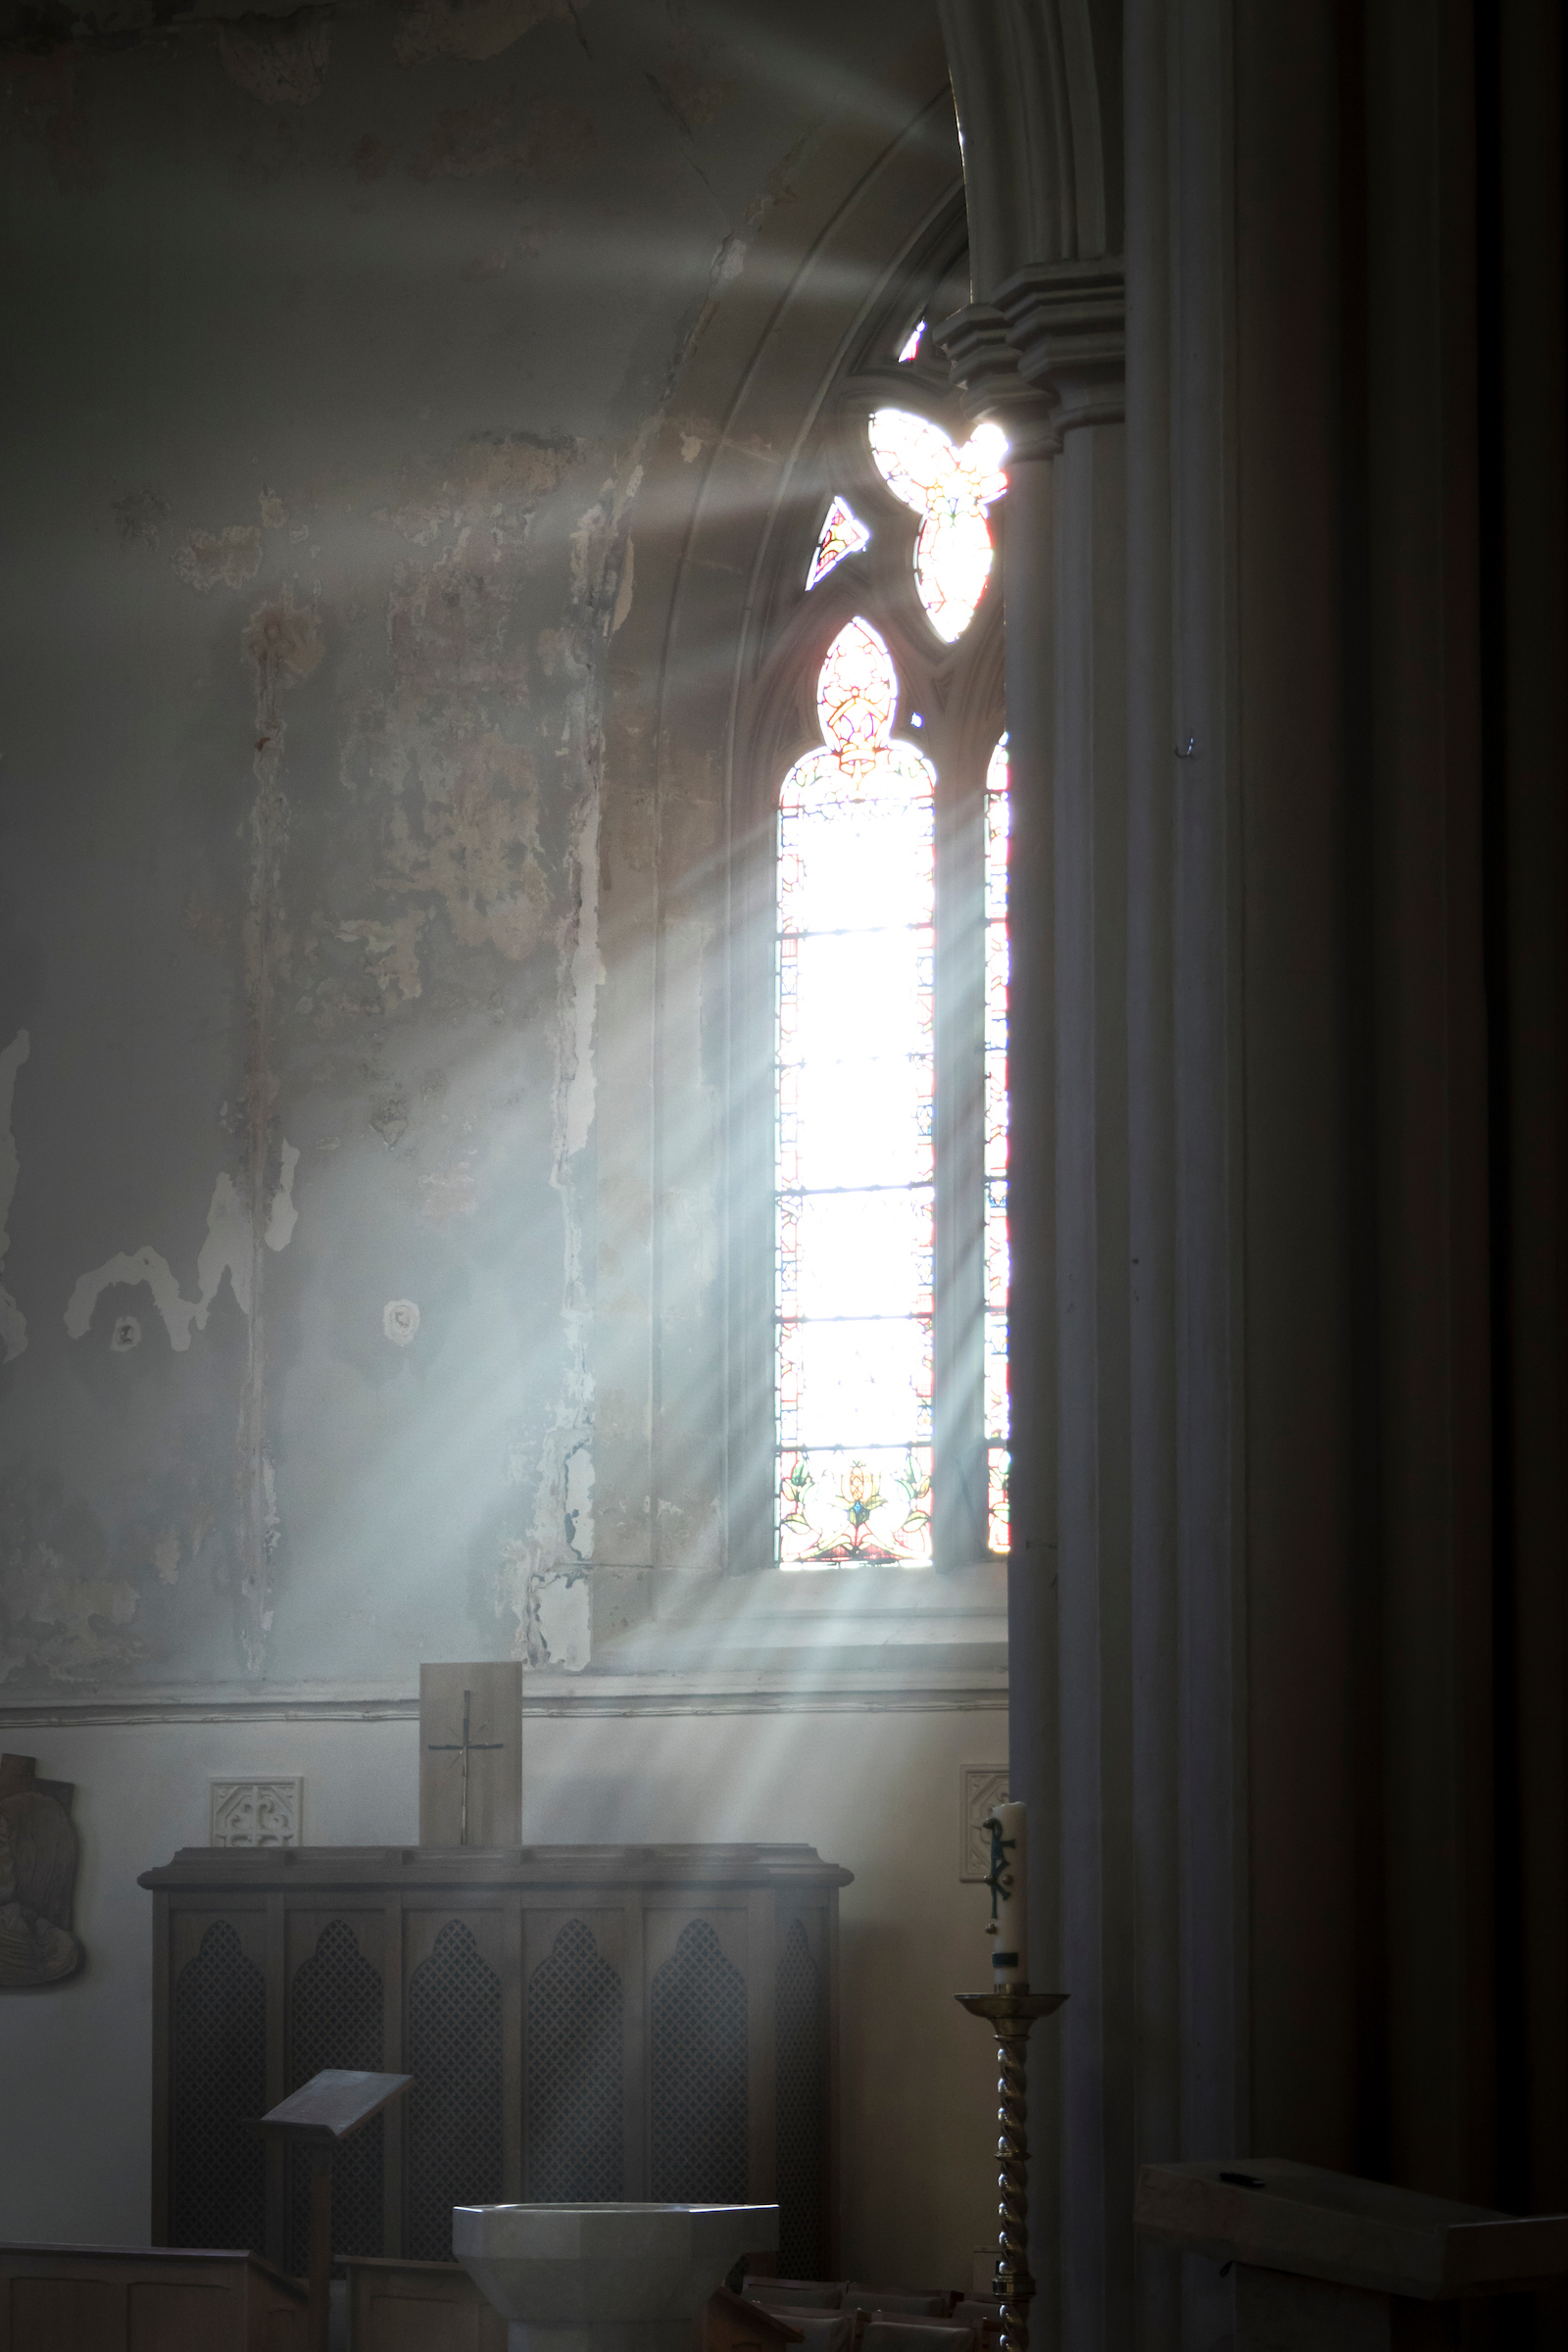 A Photograph showing A wonderful view of the sun shining through the side window pouring light into the cathedral